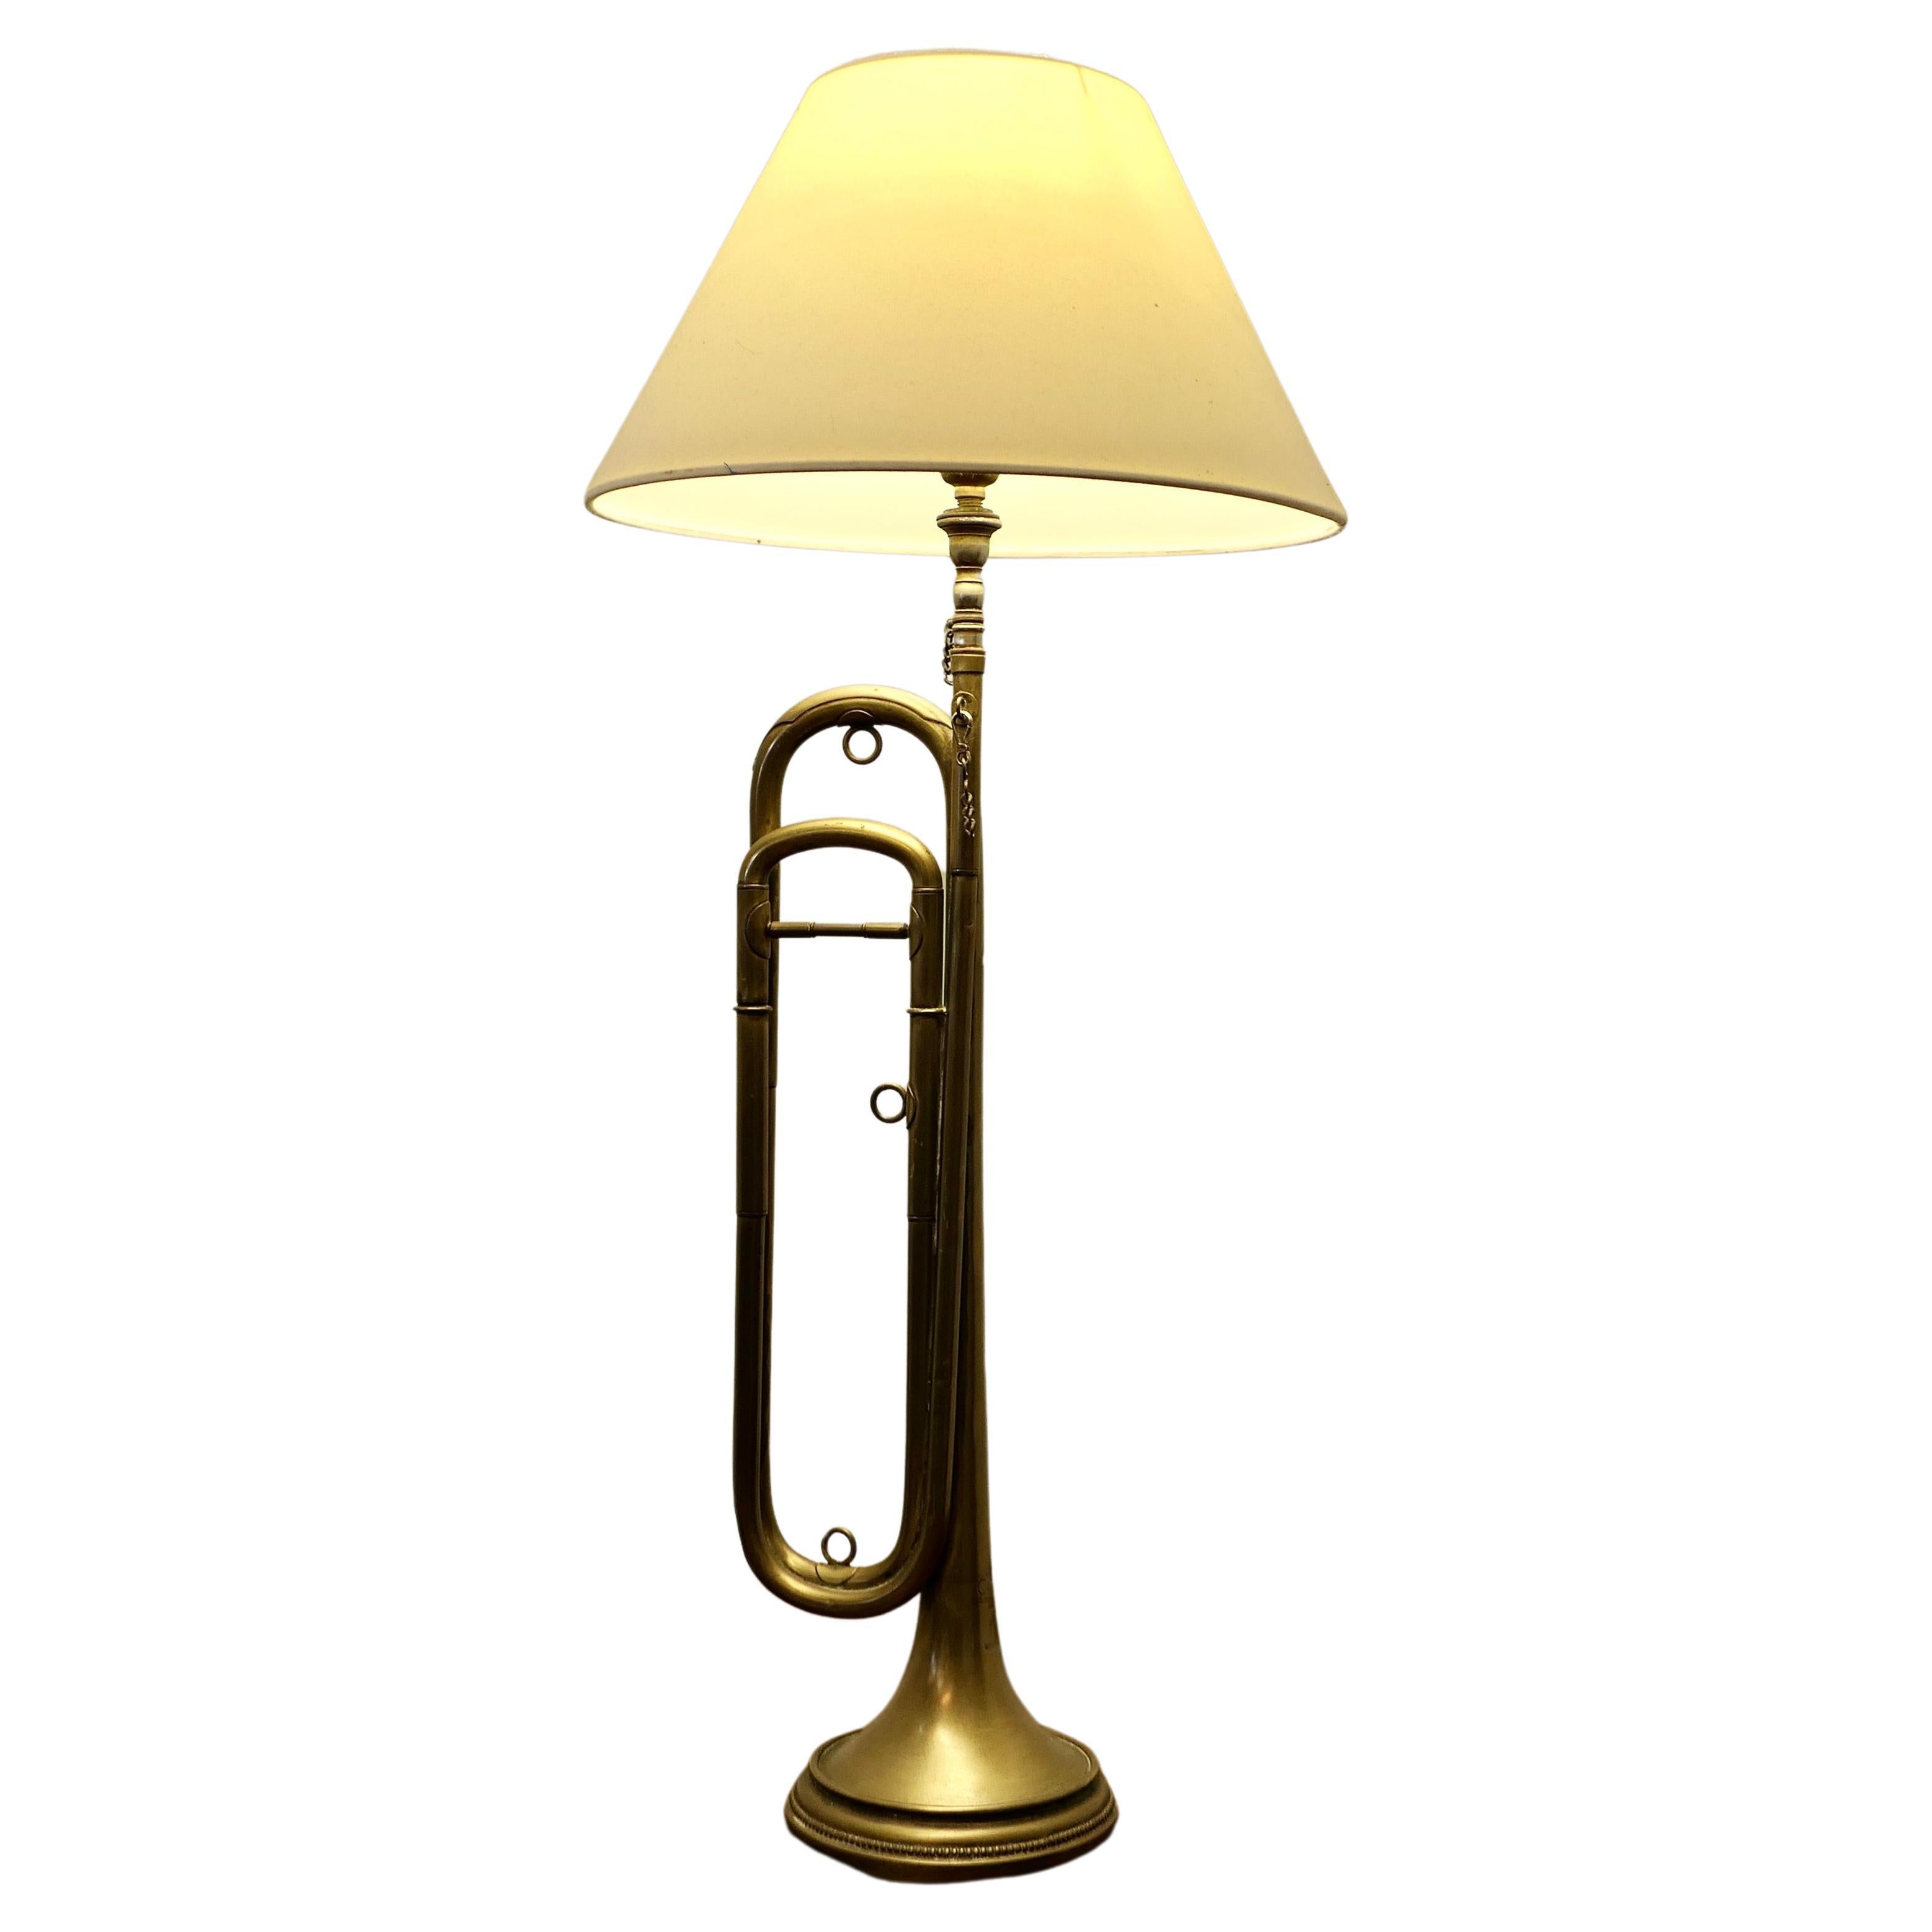 Quirky Brass Table Lamp Made from a Trumpet For Sale